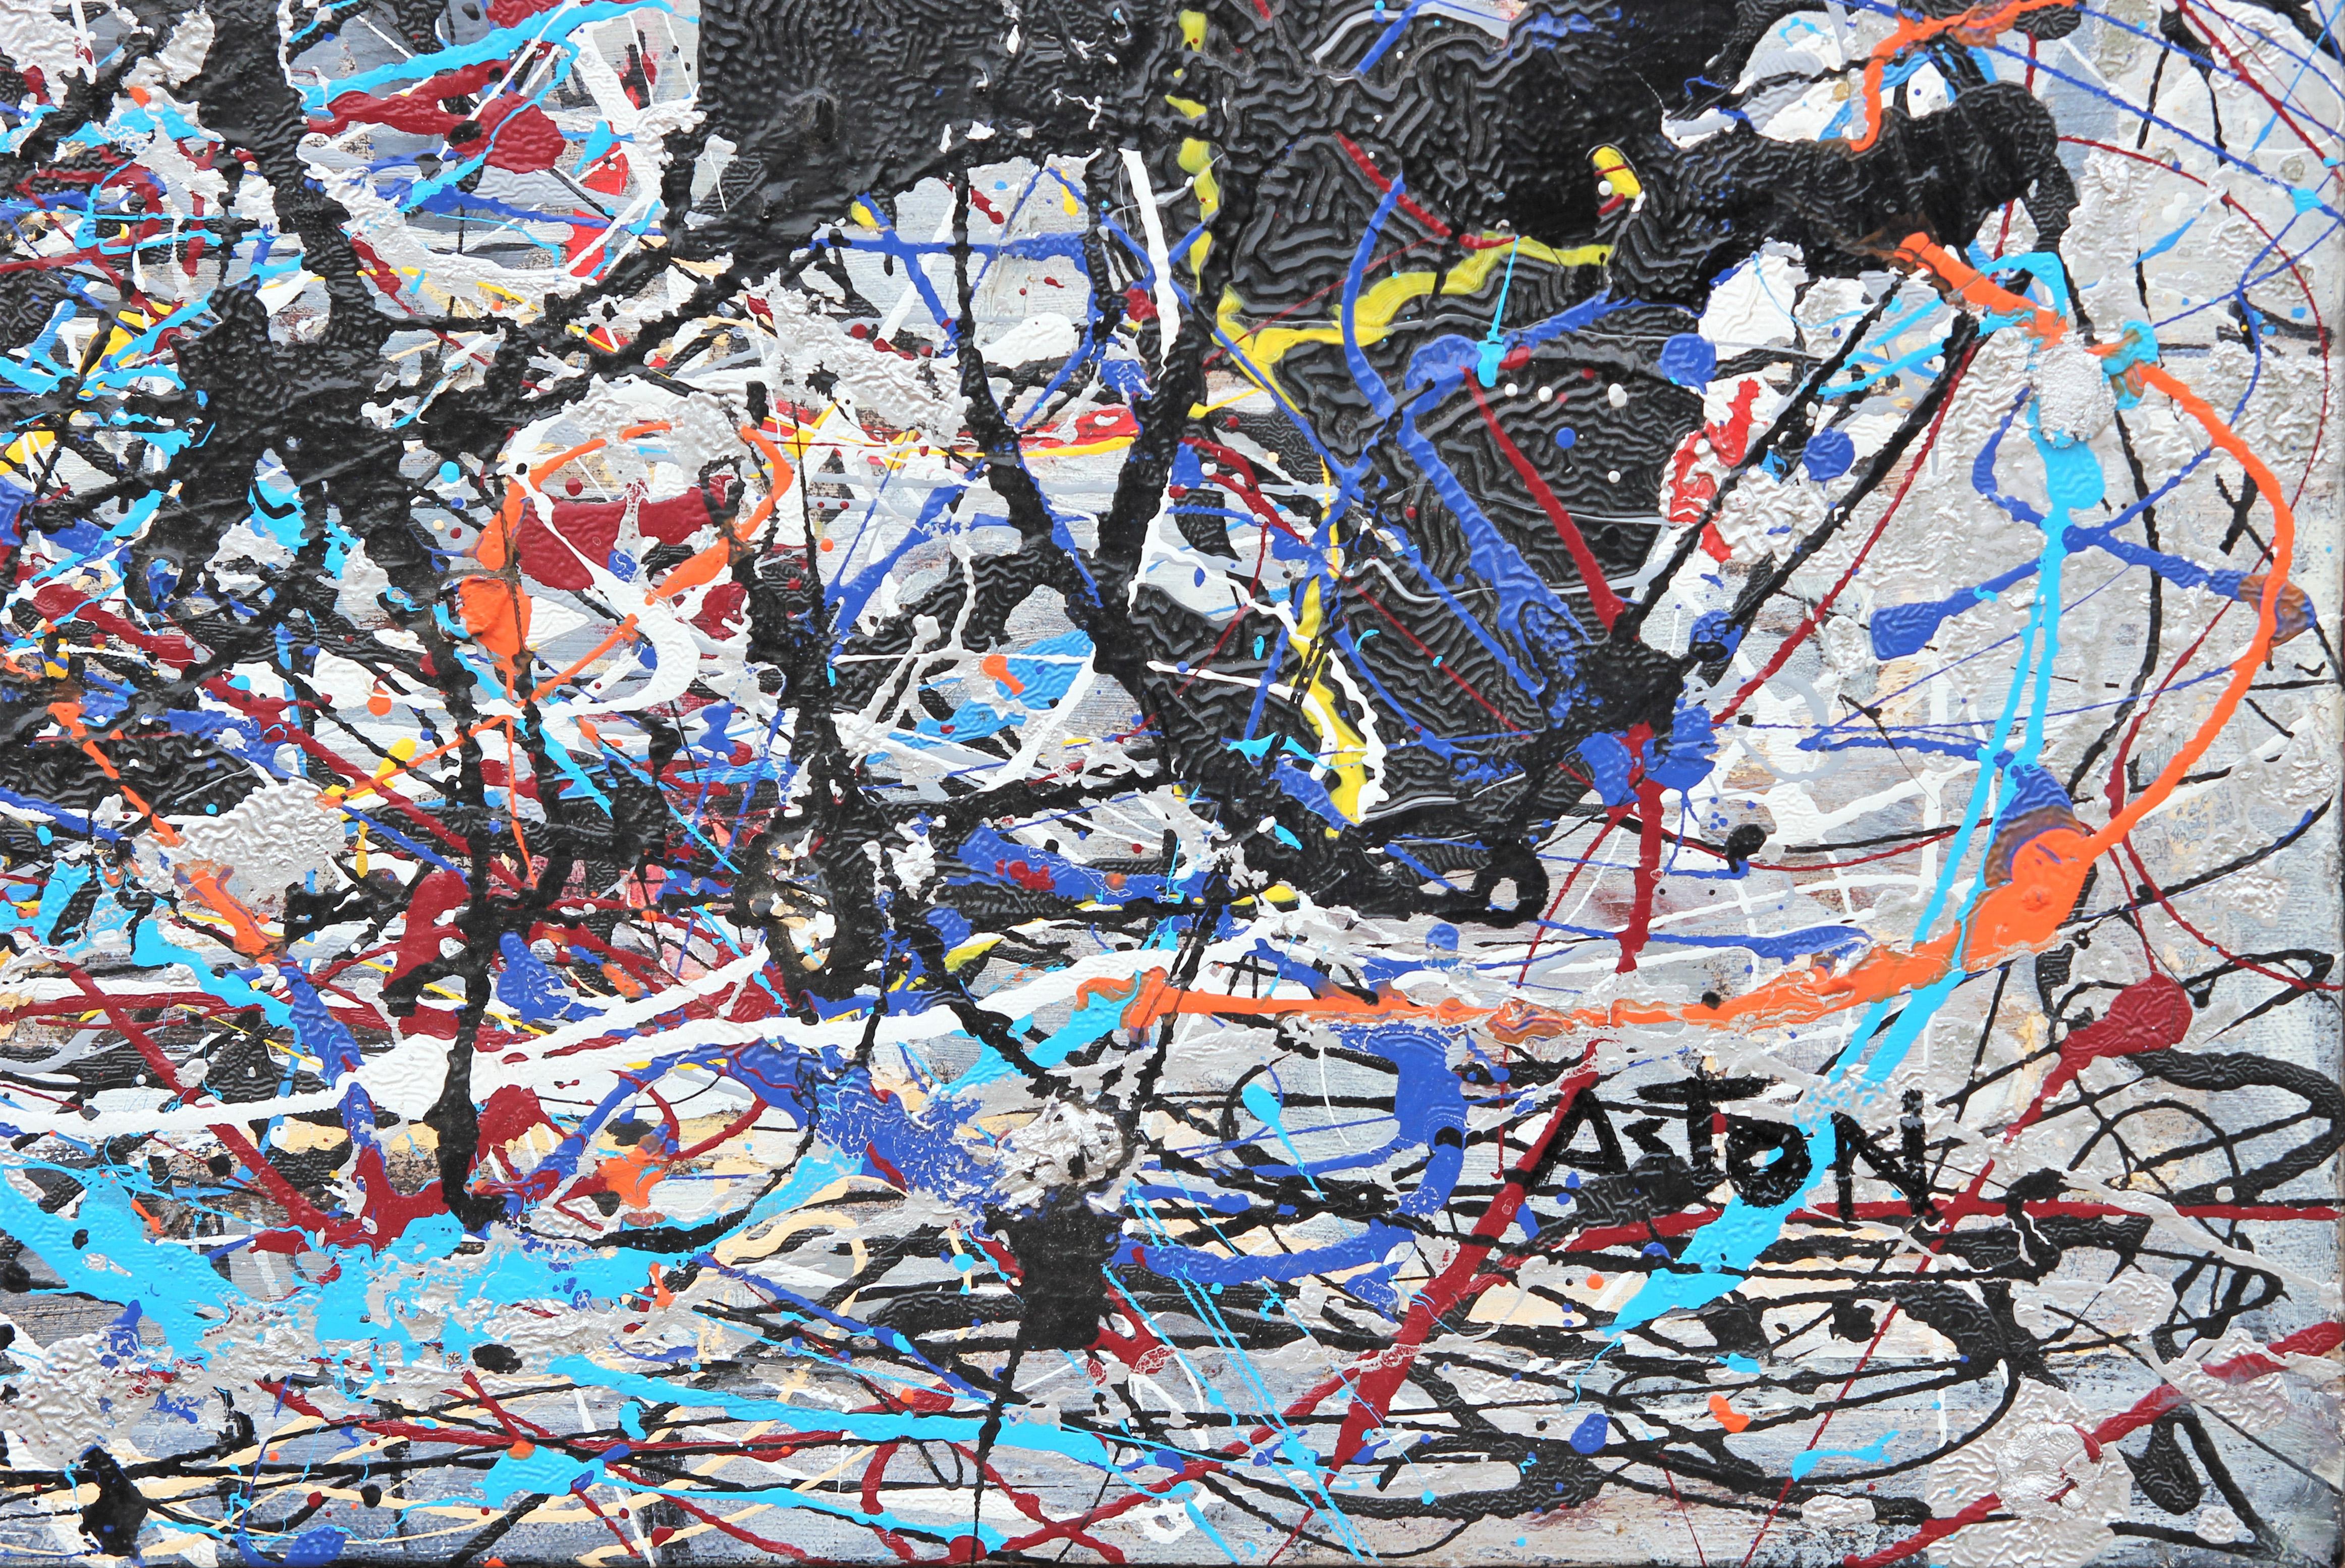 Colorful abstract expressionist painting by contemporary artist Matt Aston. The work features many layers of colorful paint splatters set against a silver background in the style popularized by Jackson Pollock. Signed by artist in front lower right